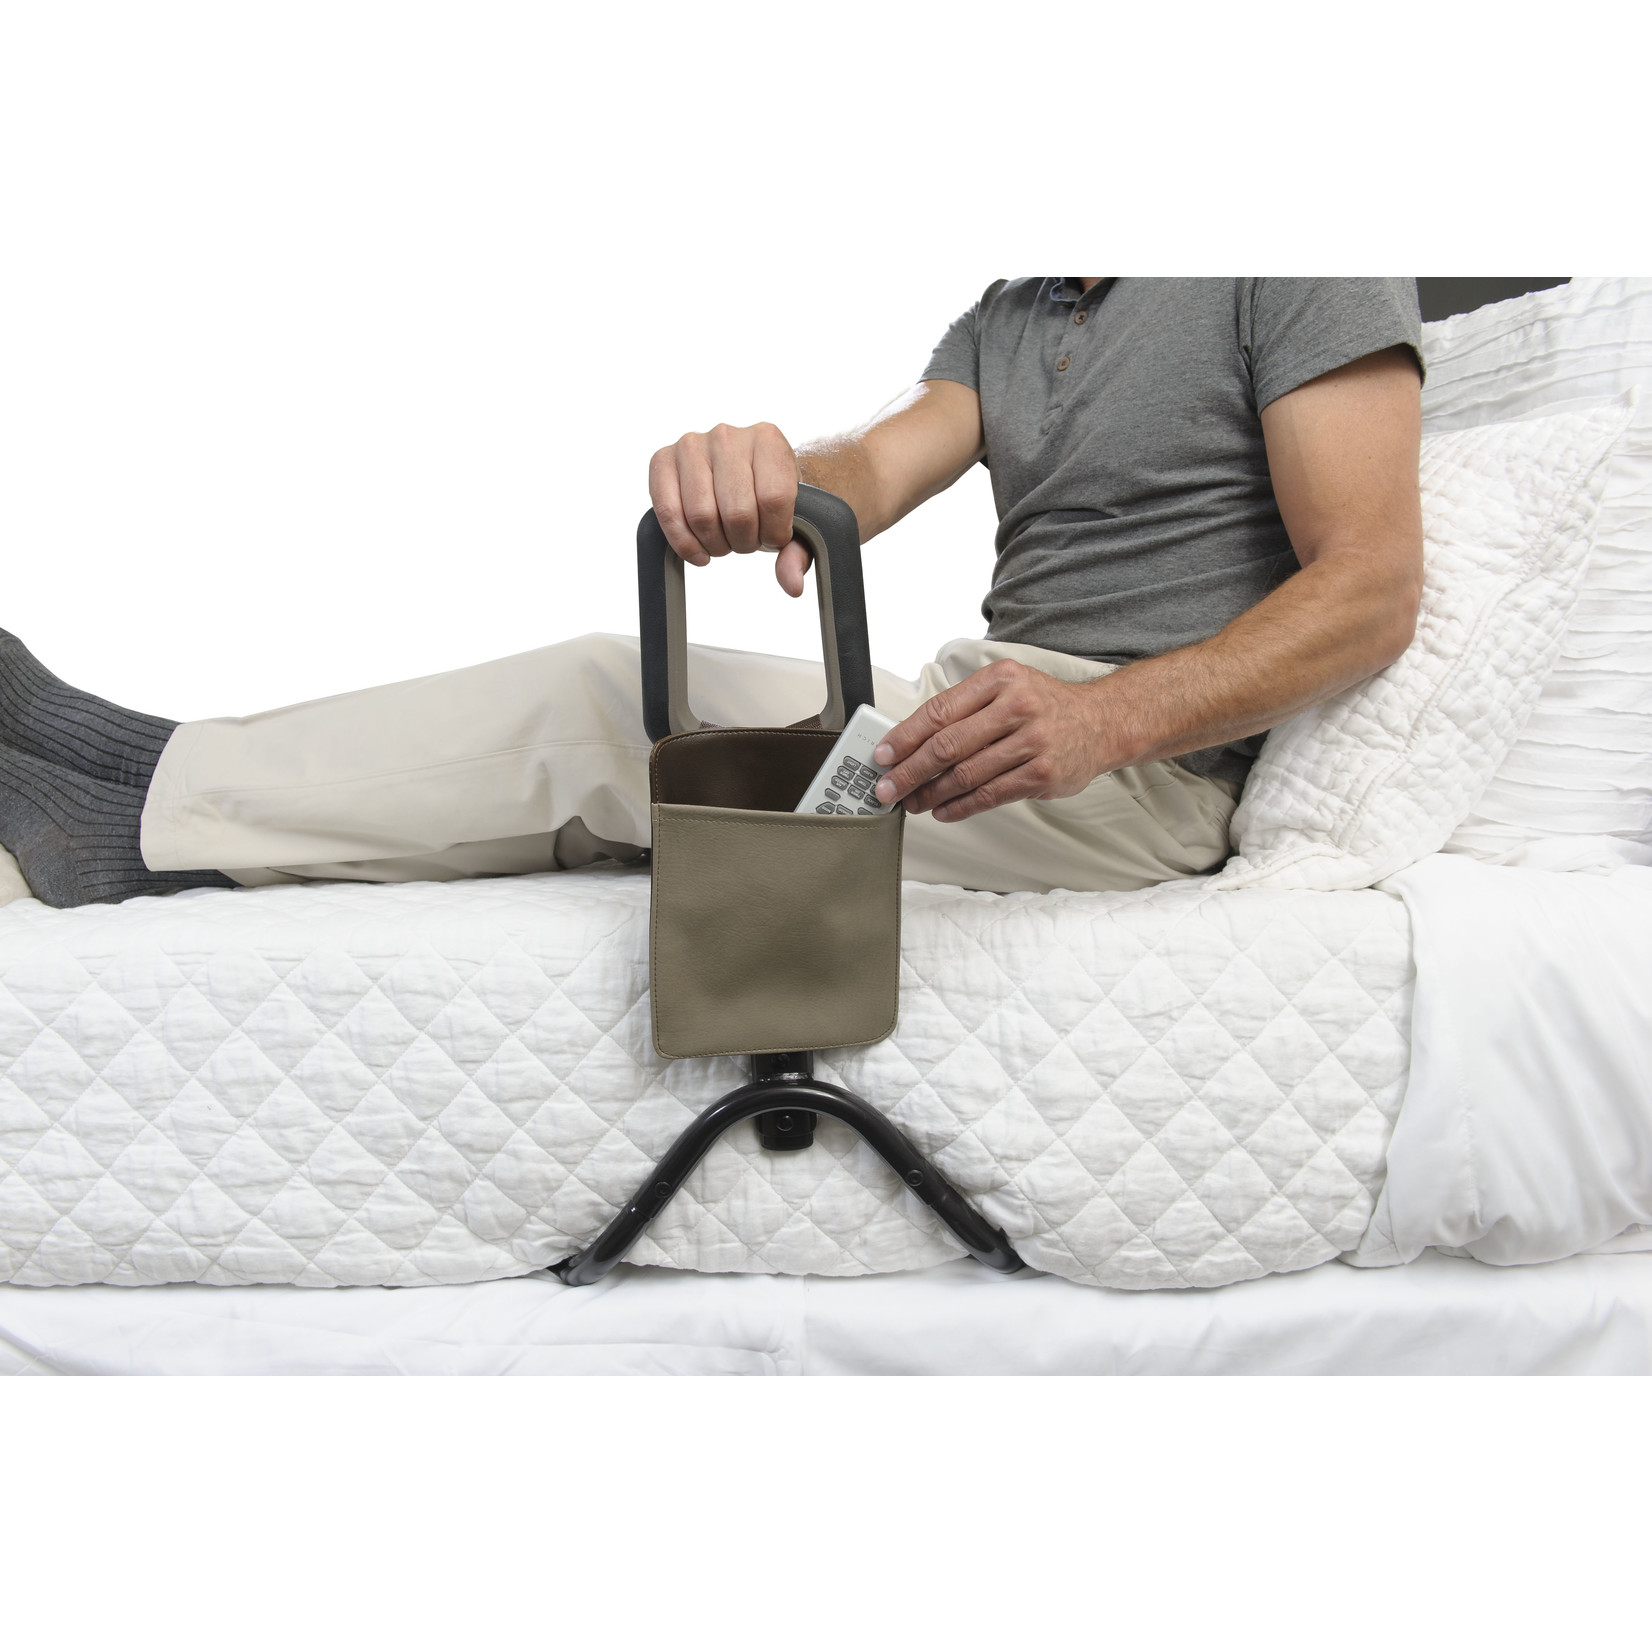 Signature Life Confidence Bed Handle